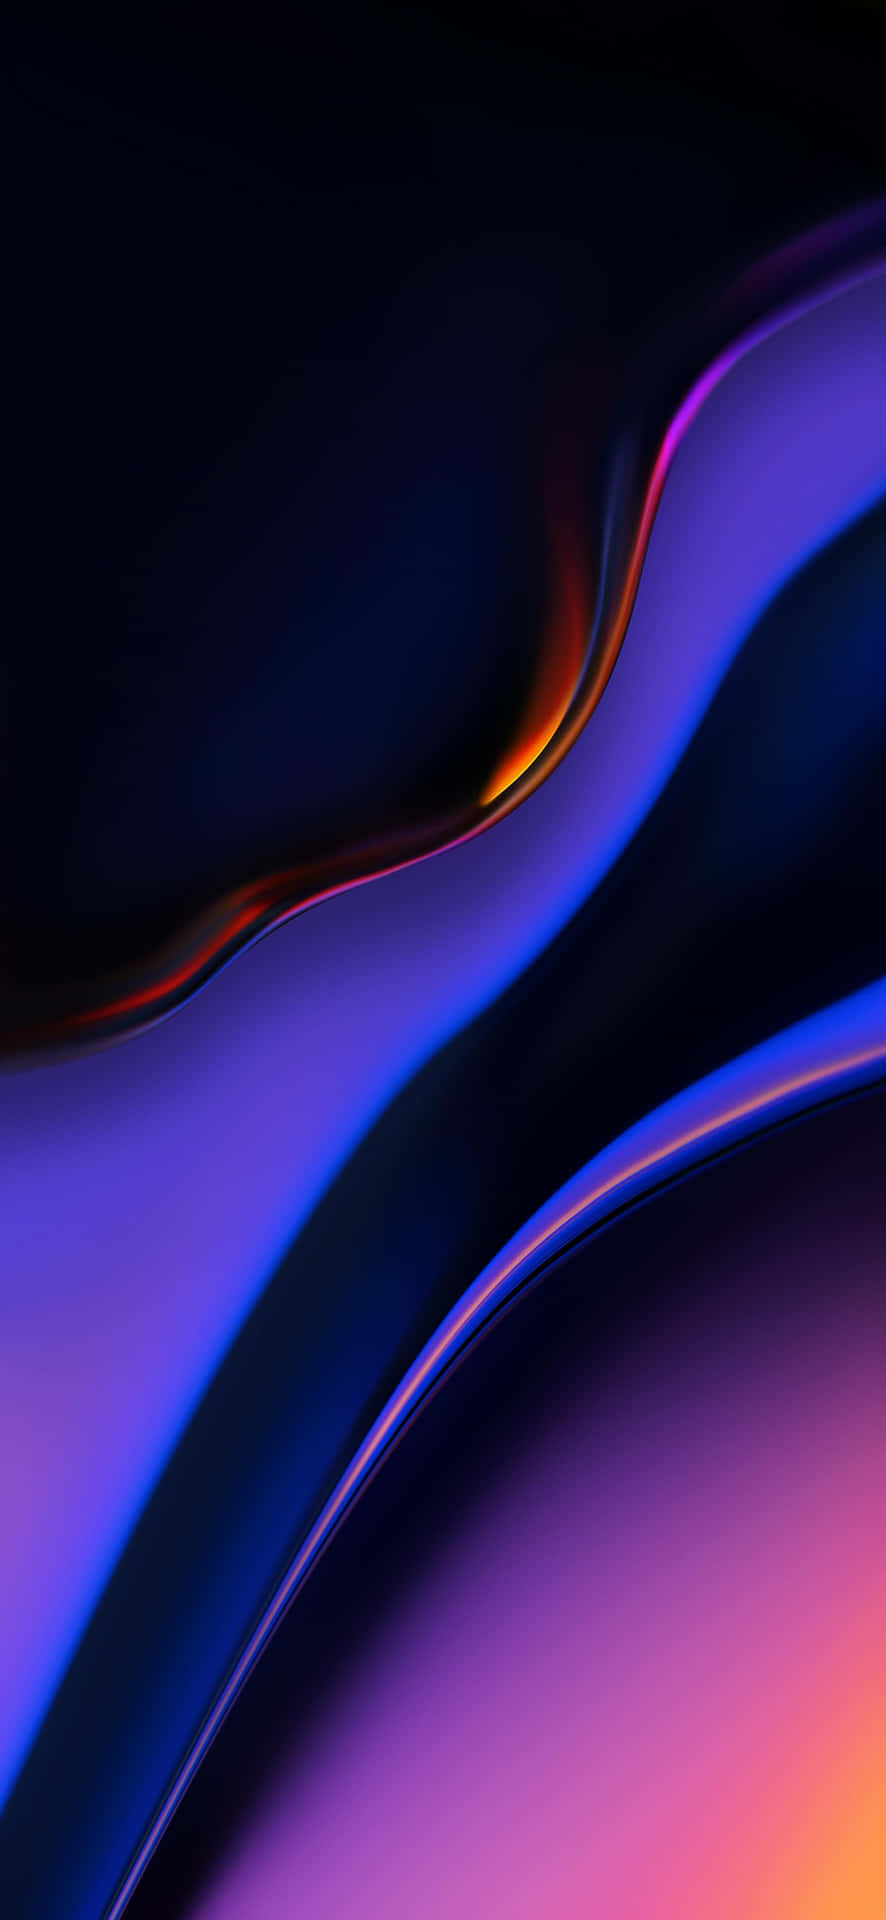 Create a masterpiece with the powerful Samsung AMOLED display Wallpaper